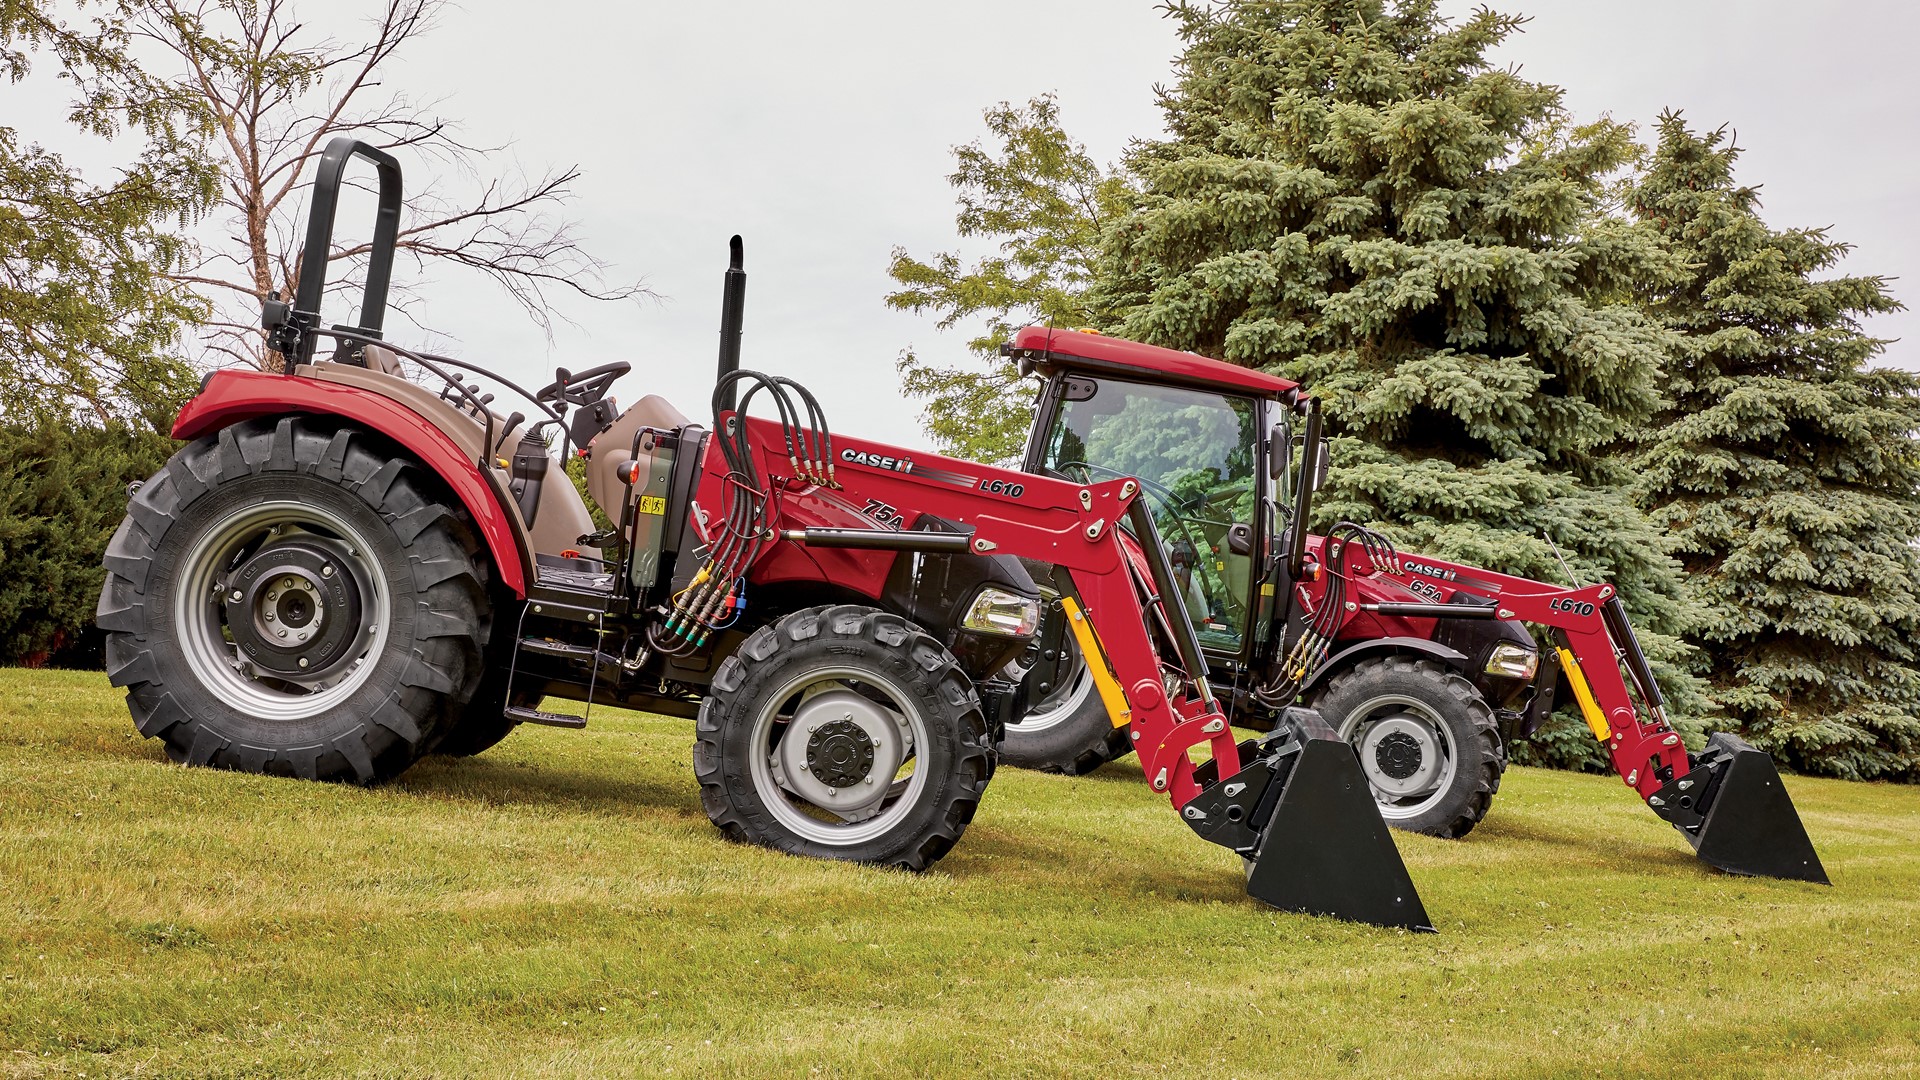 Producers can count on Farmall tractors for reliable, fuel-efficient horsepower and multitasking flexibility